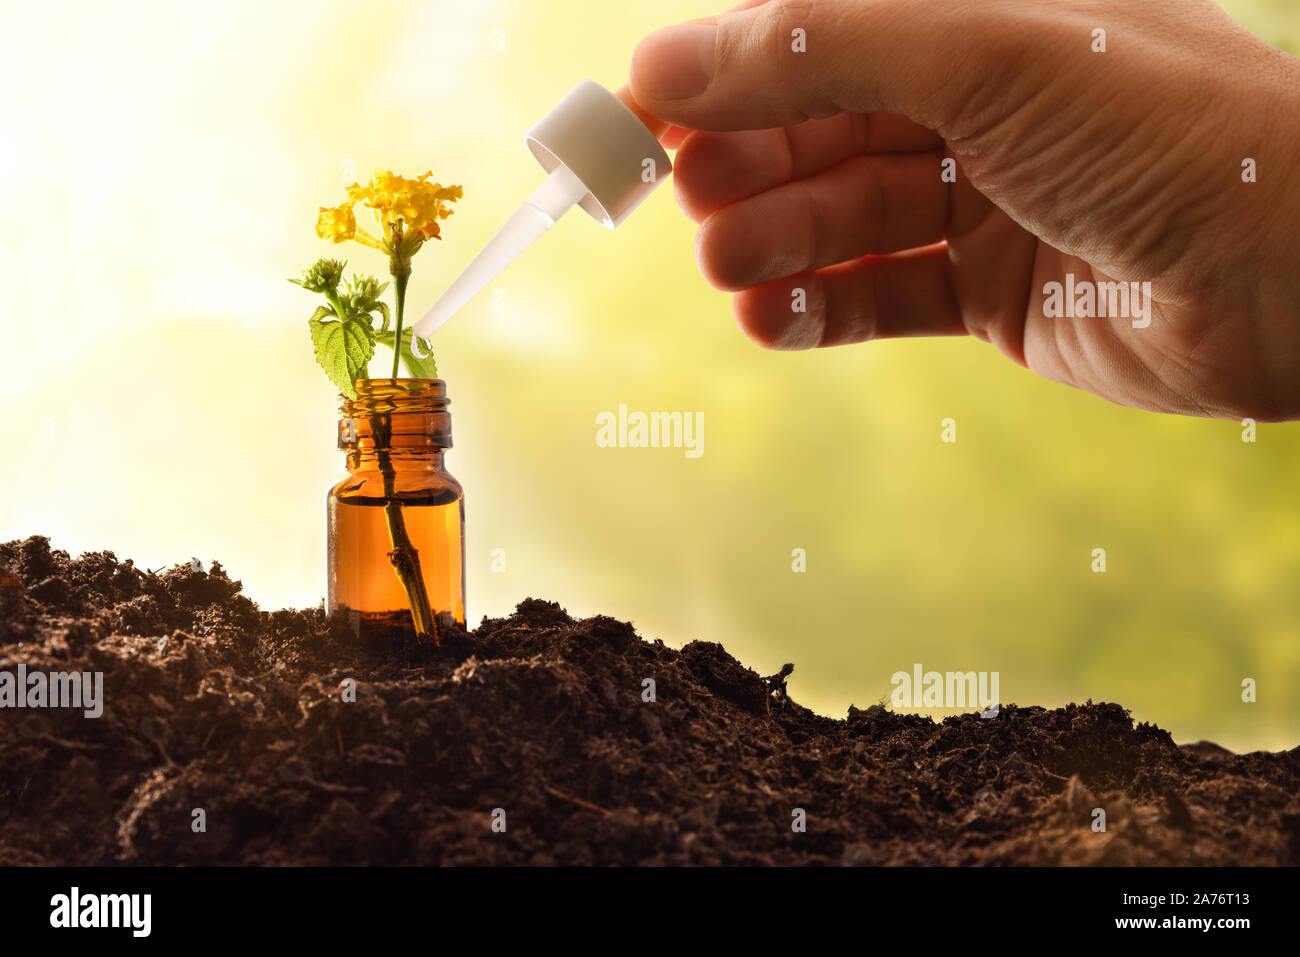 Jar with plant with yellow flower inside on soil and hand dropping with dropper and green nature background. Alternative natural medicine concept. Fro Stock Photo